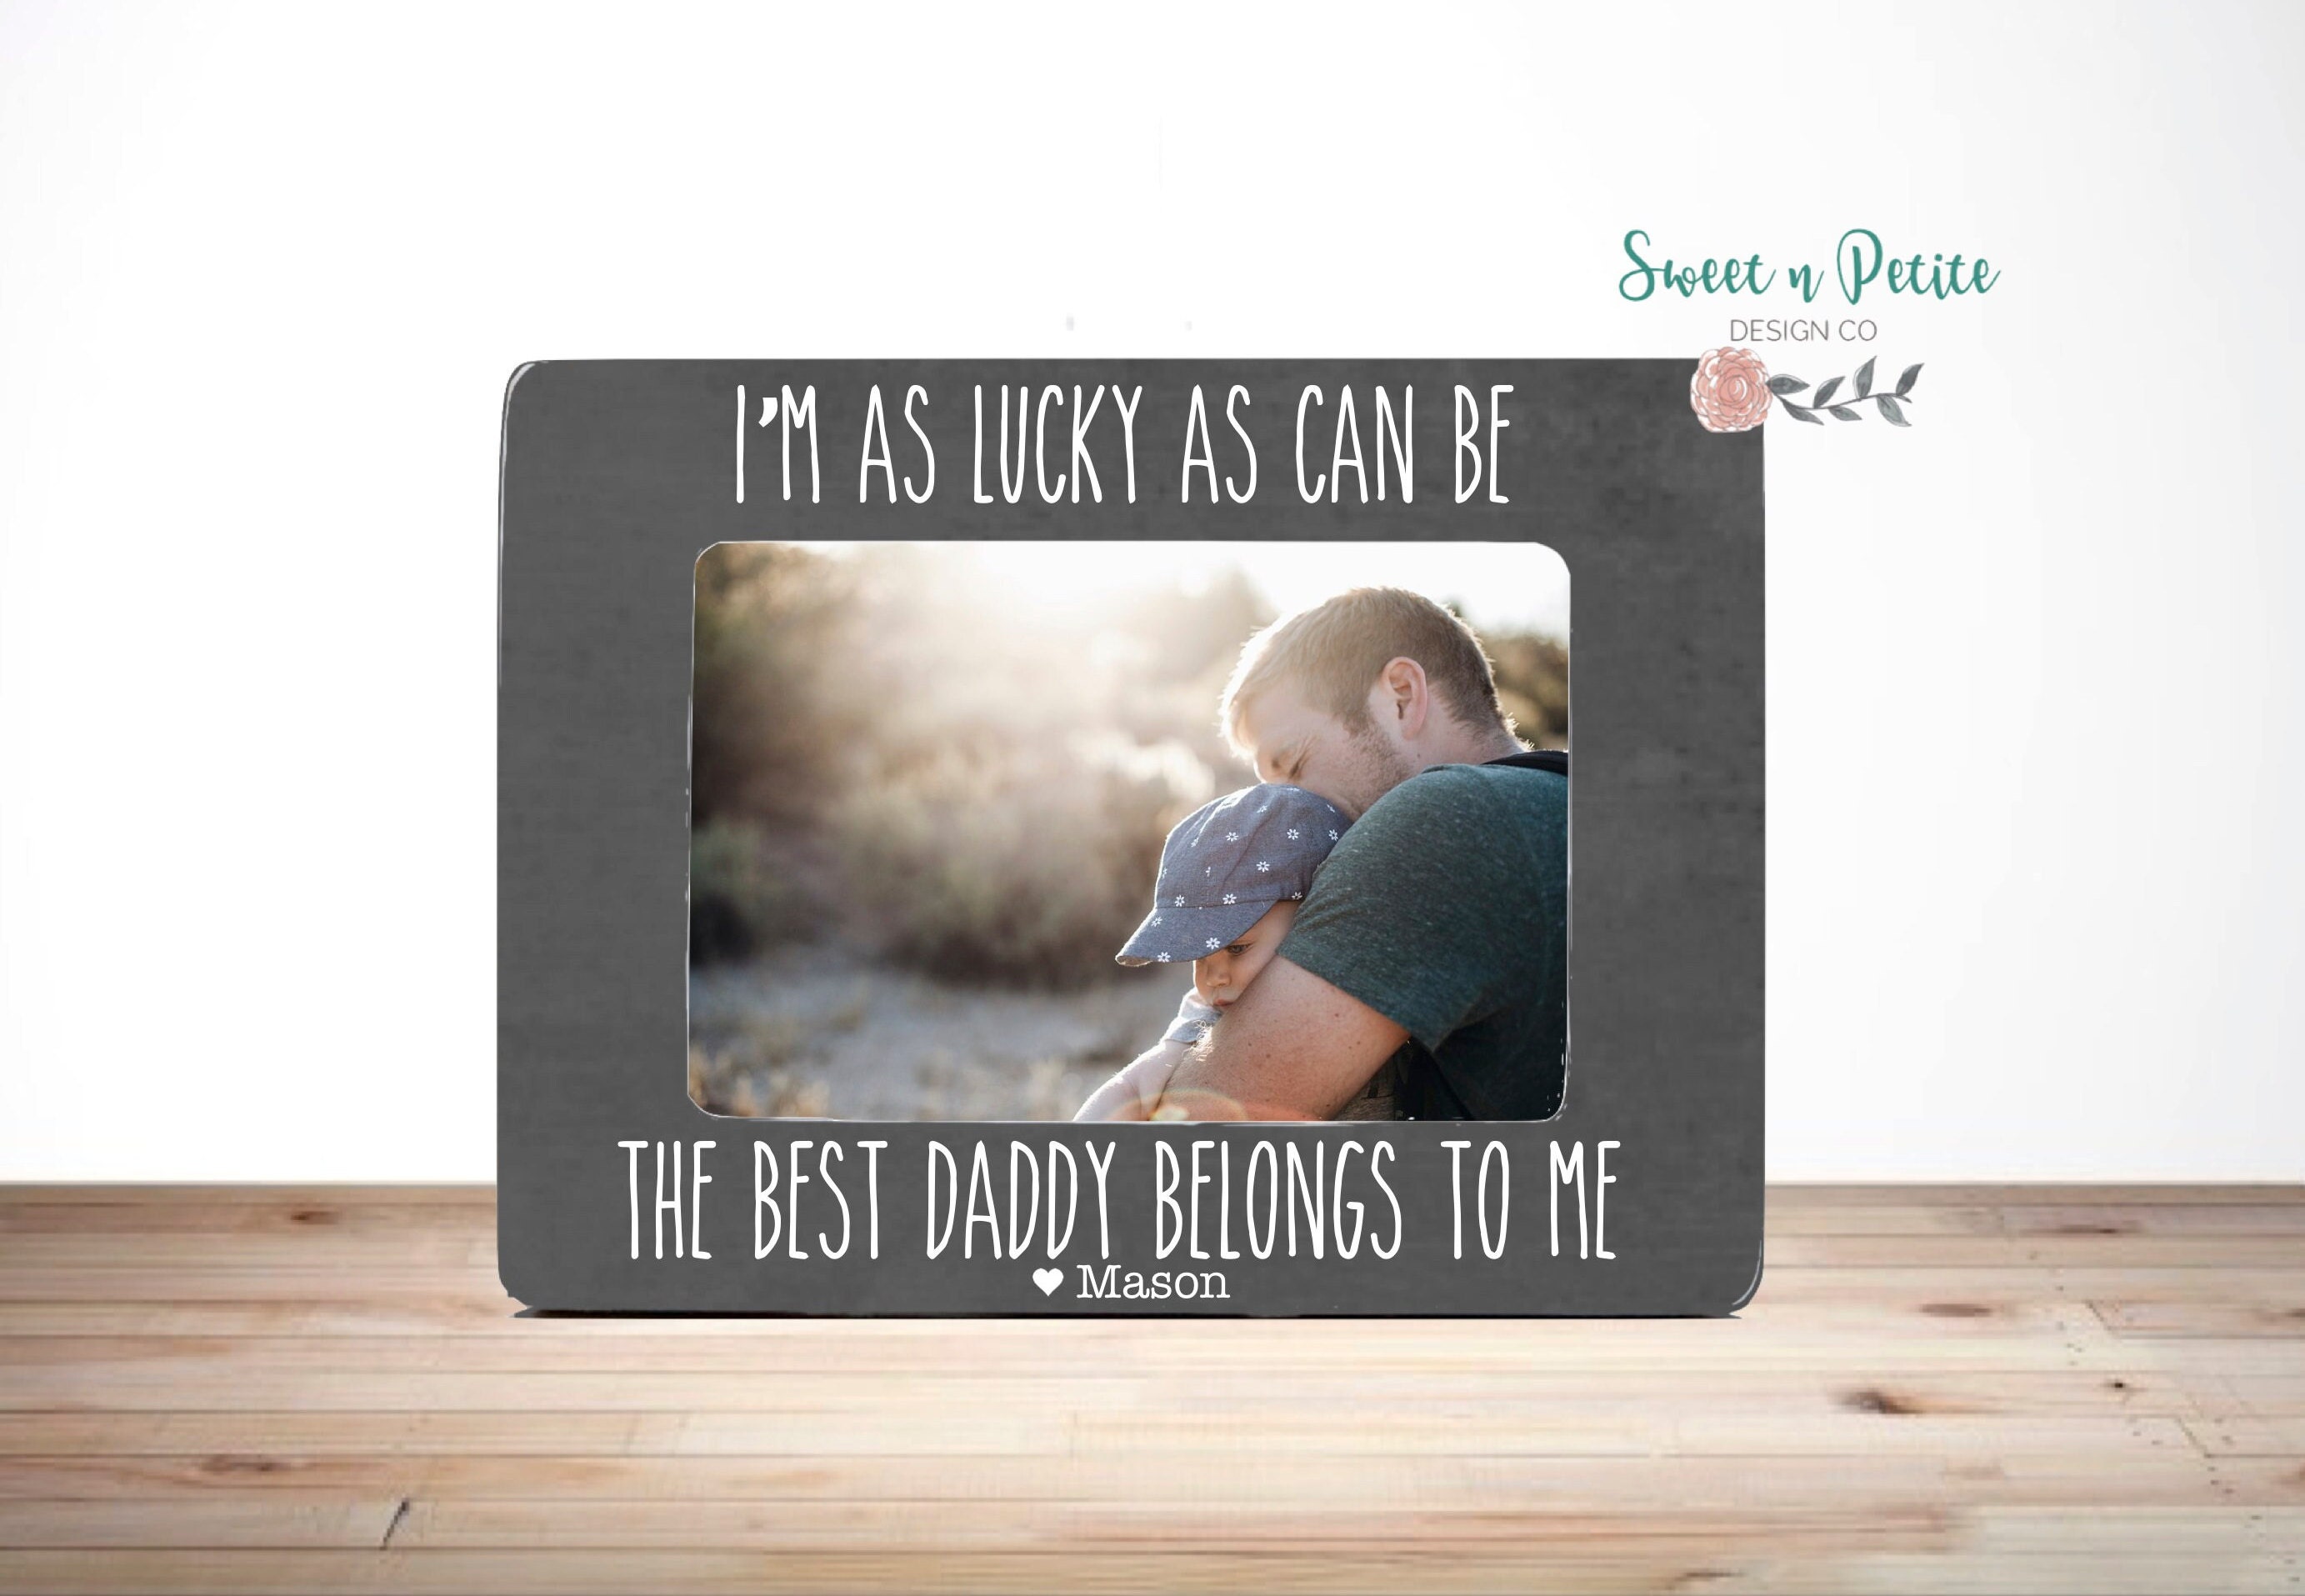 Dear Daddy Personalized Ultrasound Photo LED Acrylic Plaque, 1st Time Dad  Gift, First Father's Day Gift, New Dad Gift, Soon to be Daddy Gift